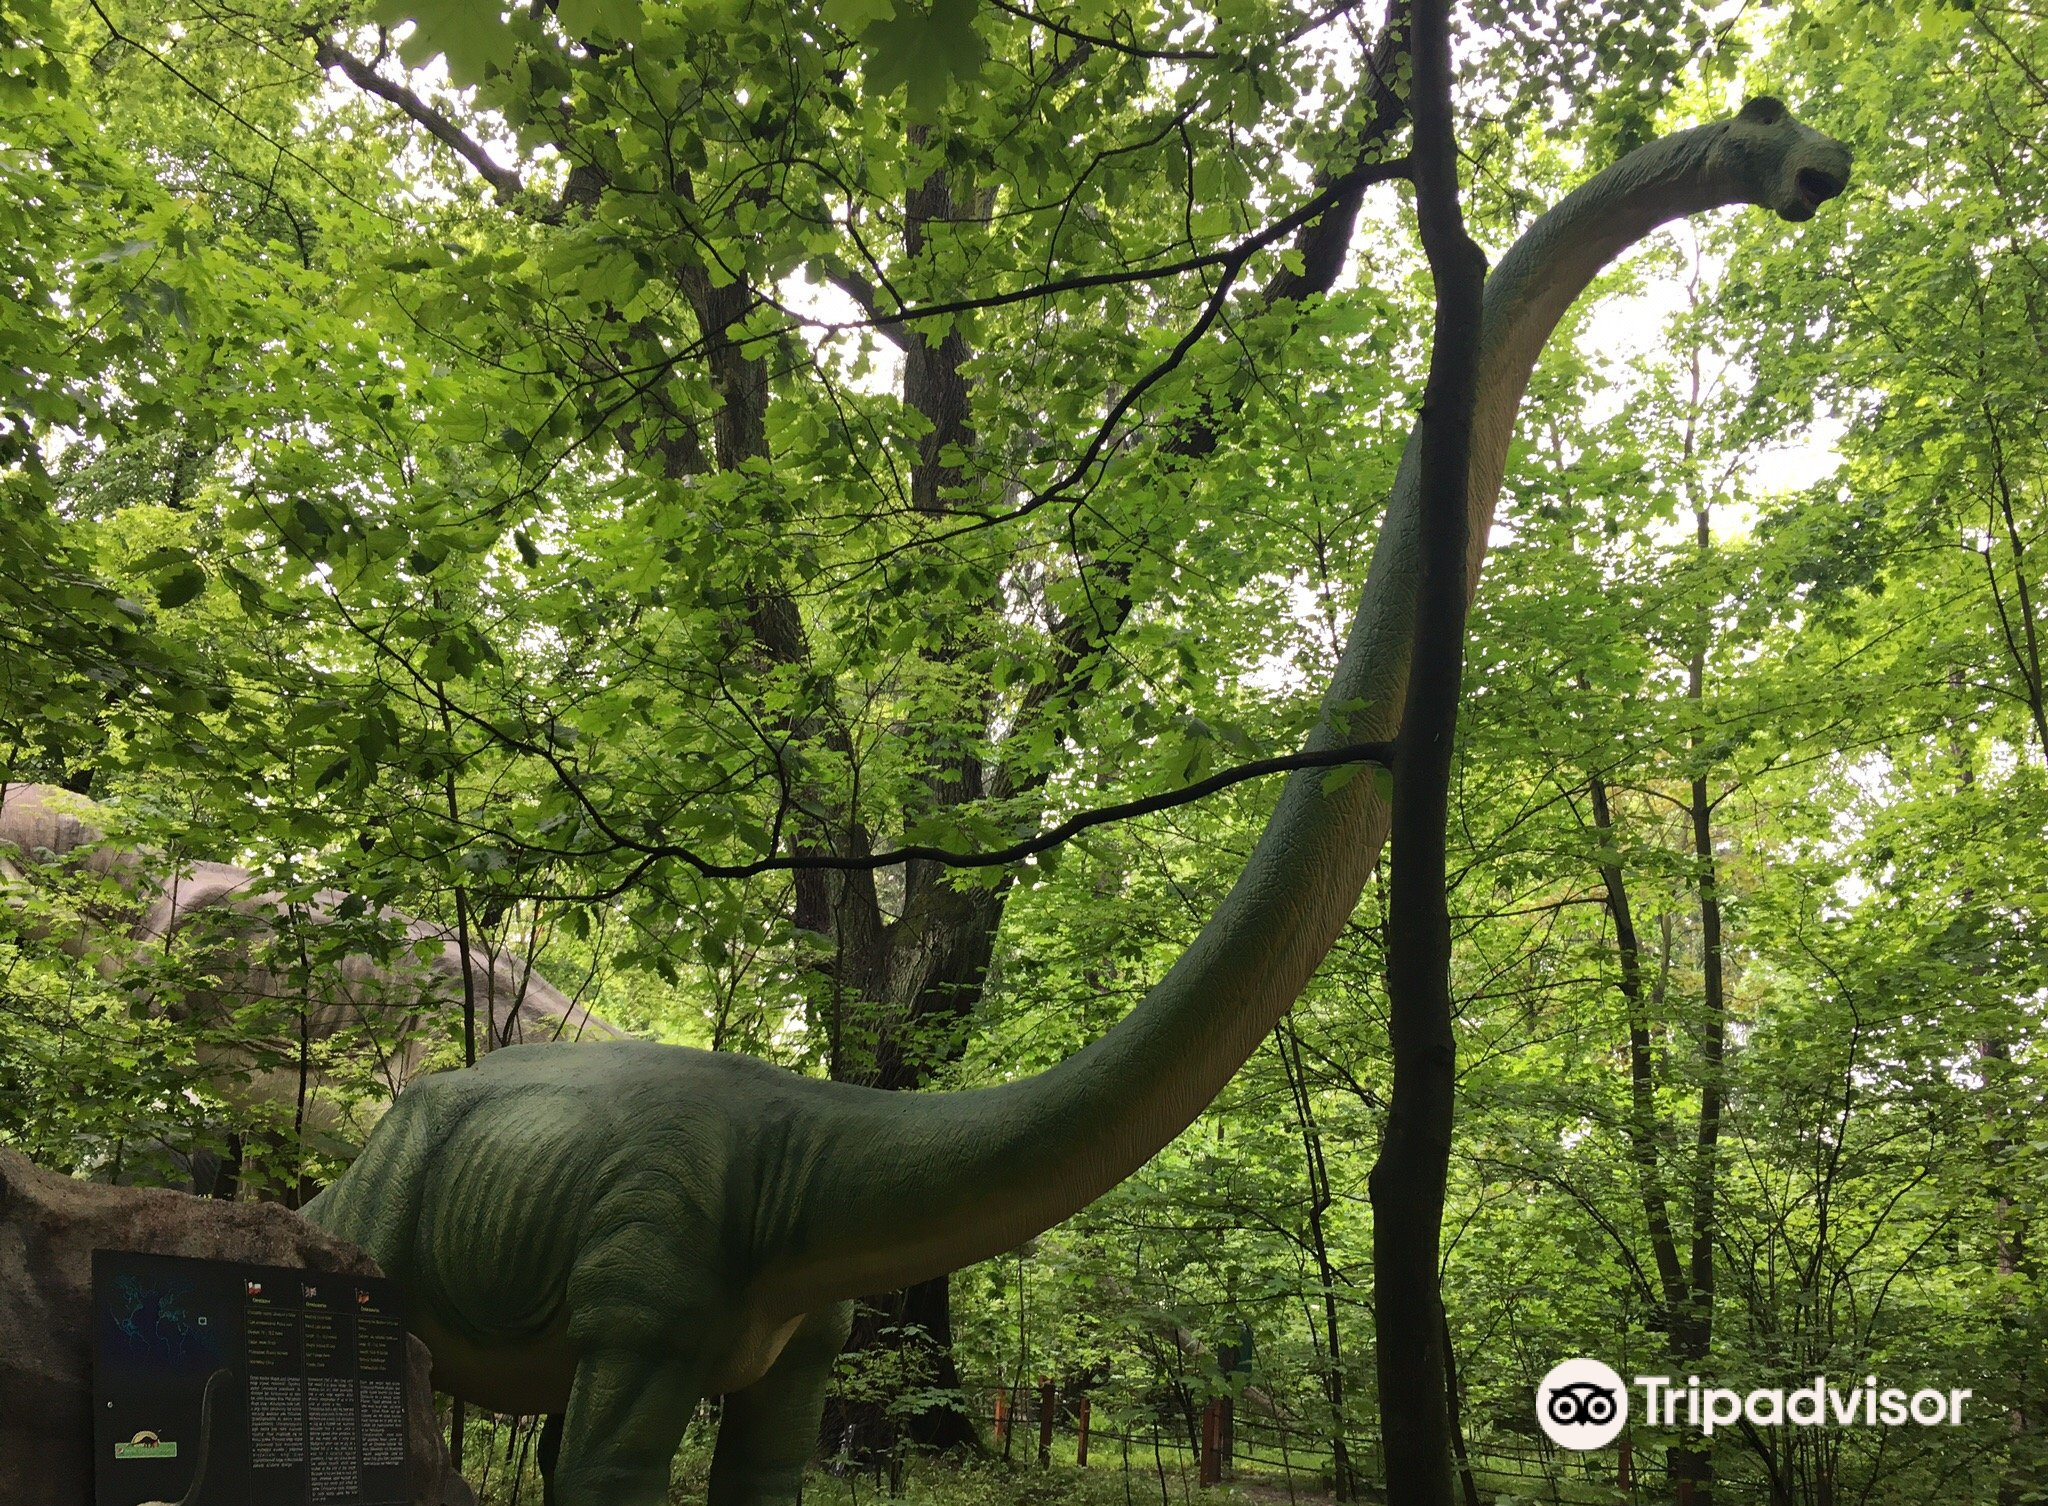 Latest travel itineraries for Dinosaur Park and Leisure Dinolandia in  December (updated in 2023), Dinosaur Park and Leisure Dinolandia reviews,  Dinosaur Park and Leisure Dinolandia address and opening hours, popular  attractions, hotels